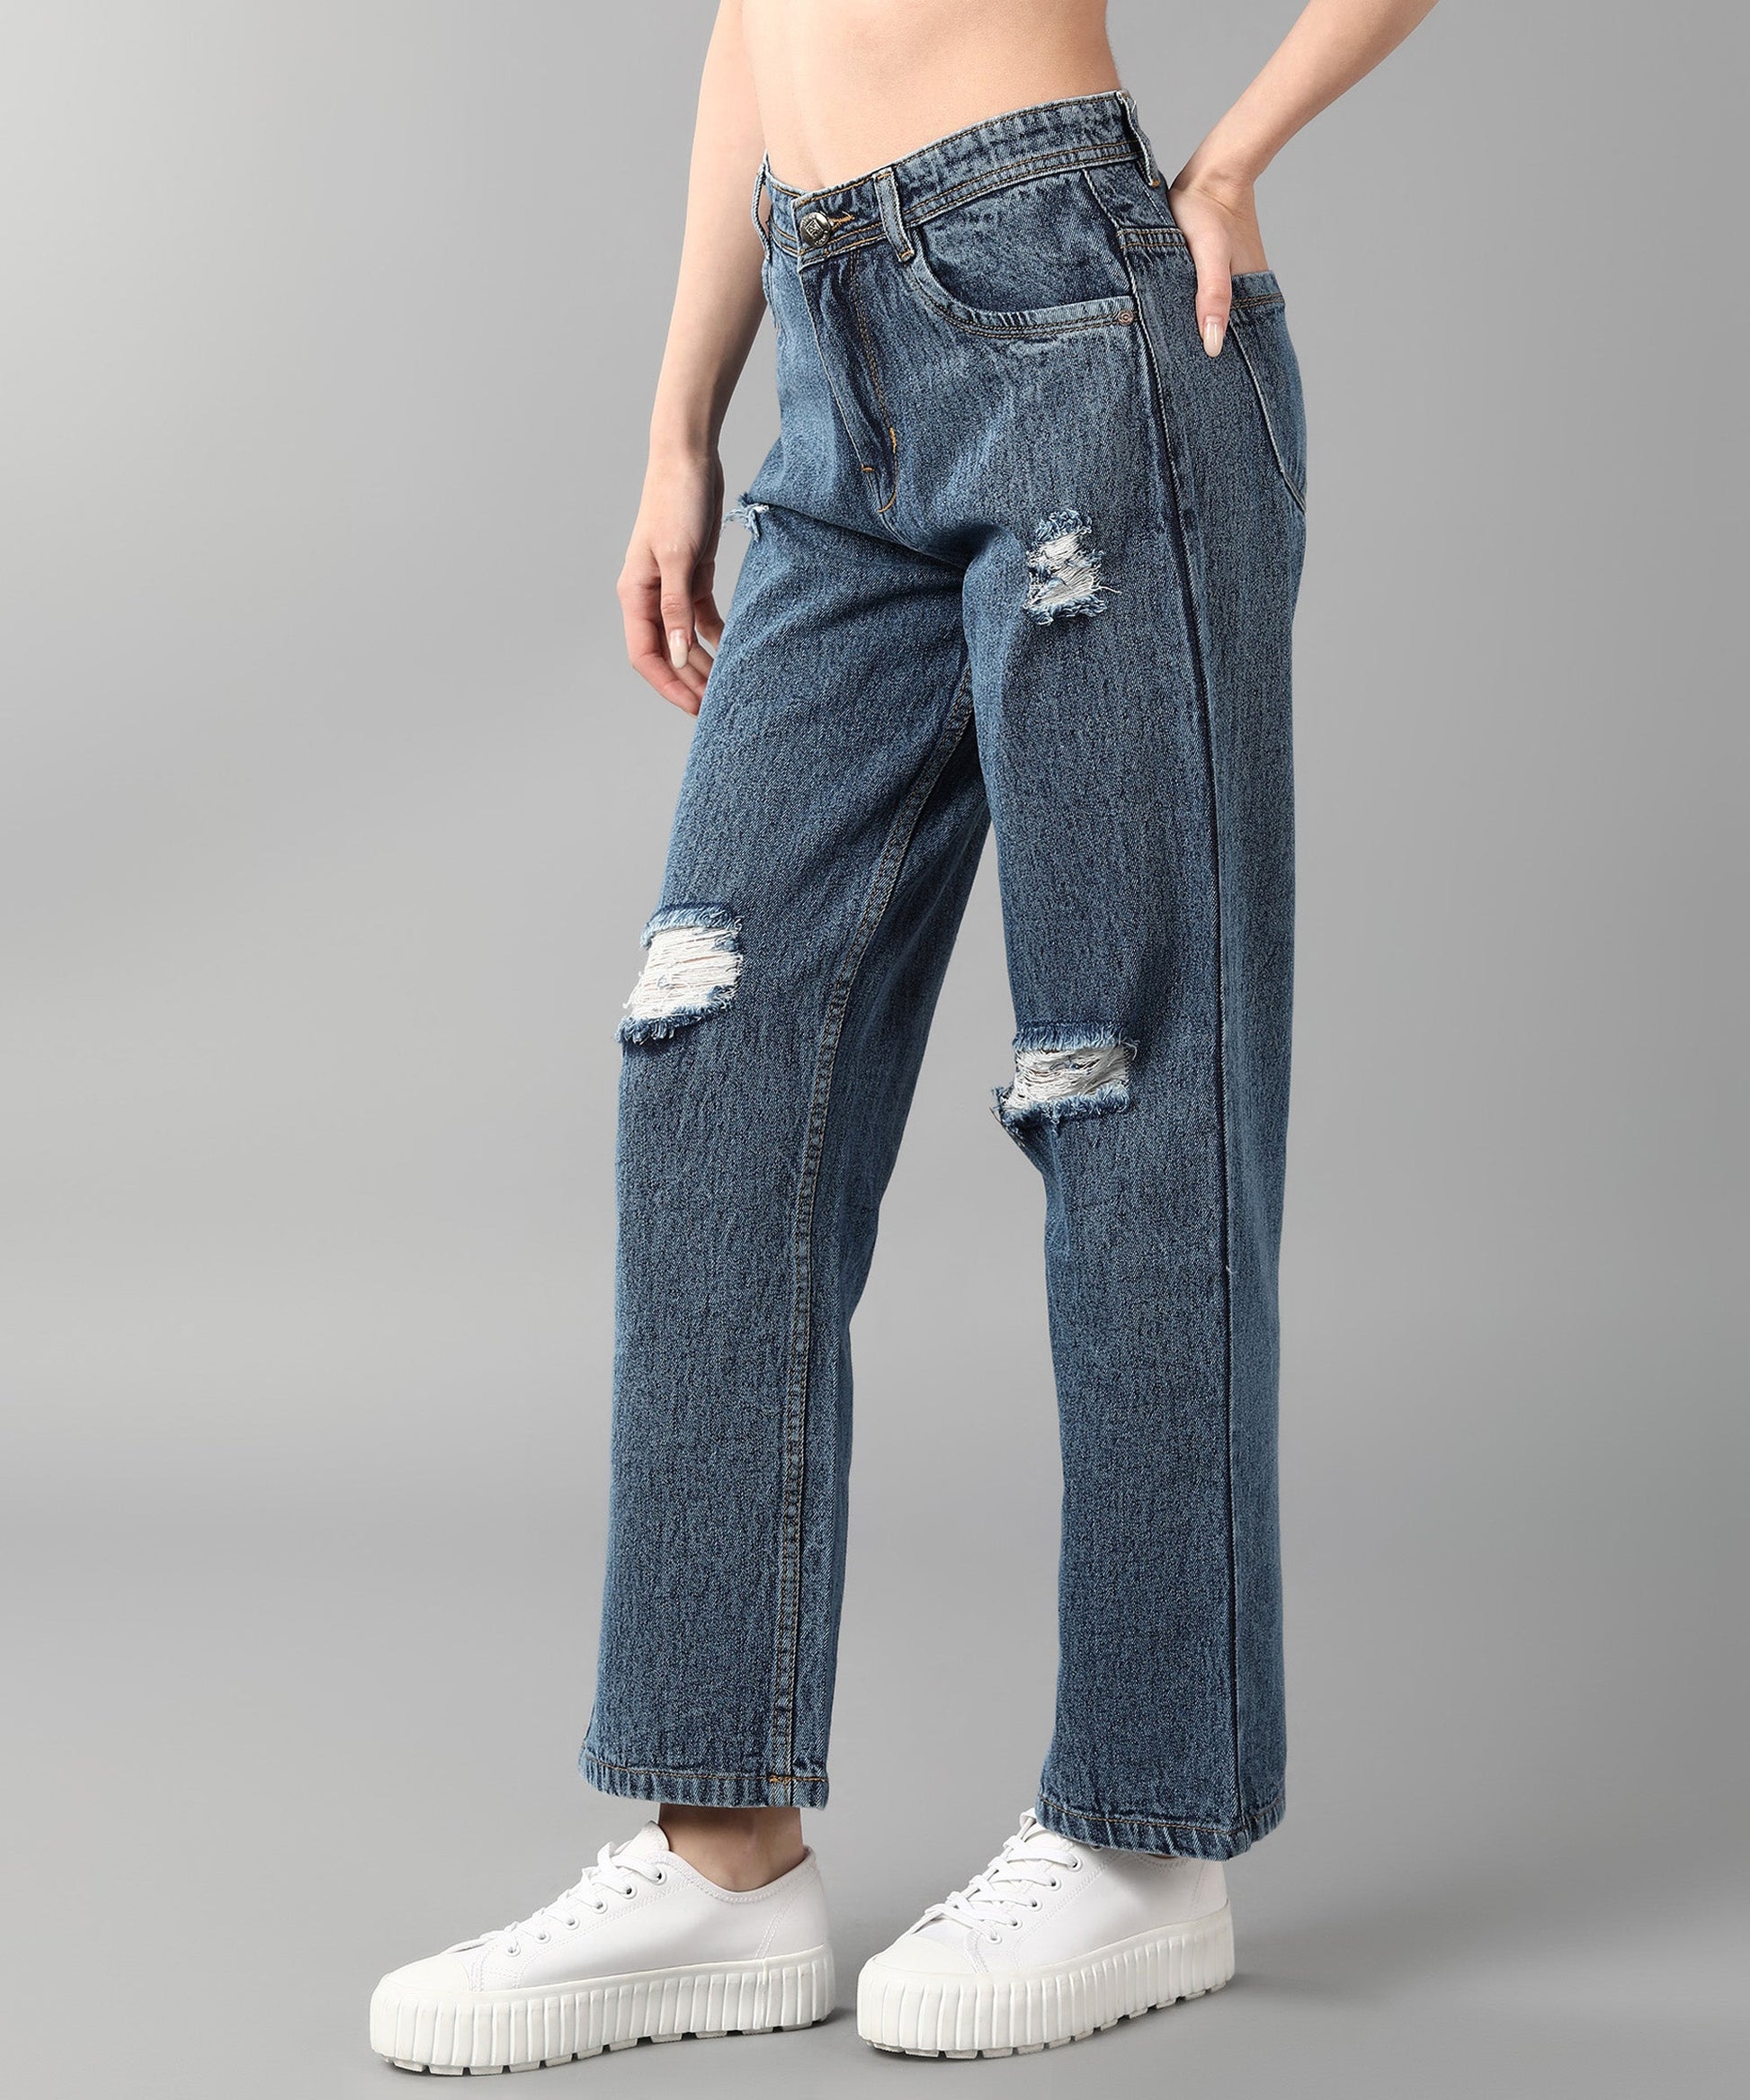 Relaxed Fit Distressed Sky Blue Jeans - NiftyJeans